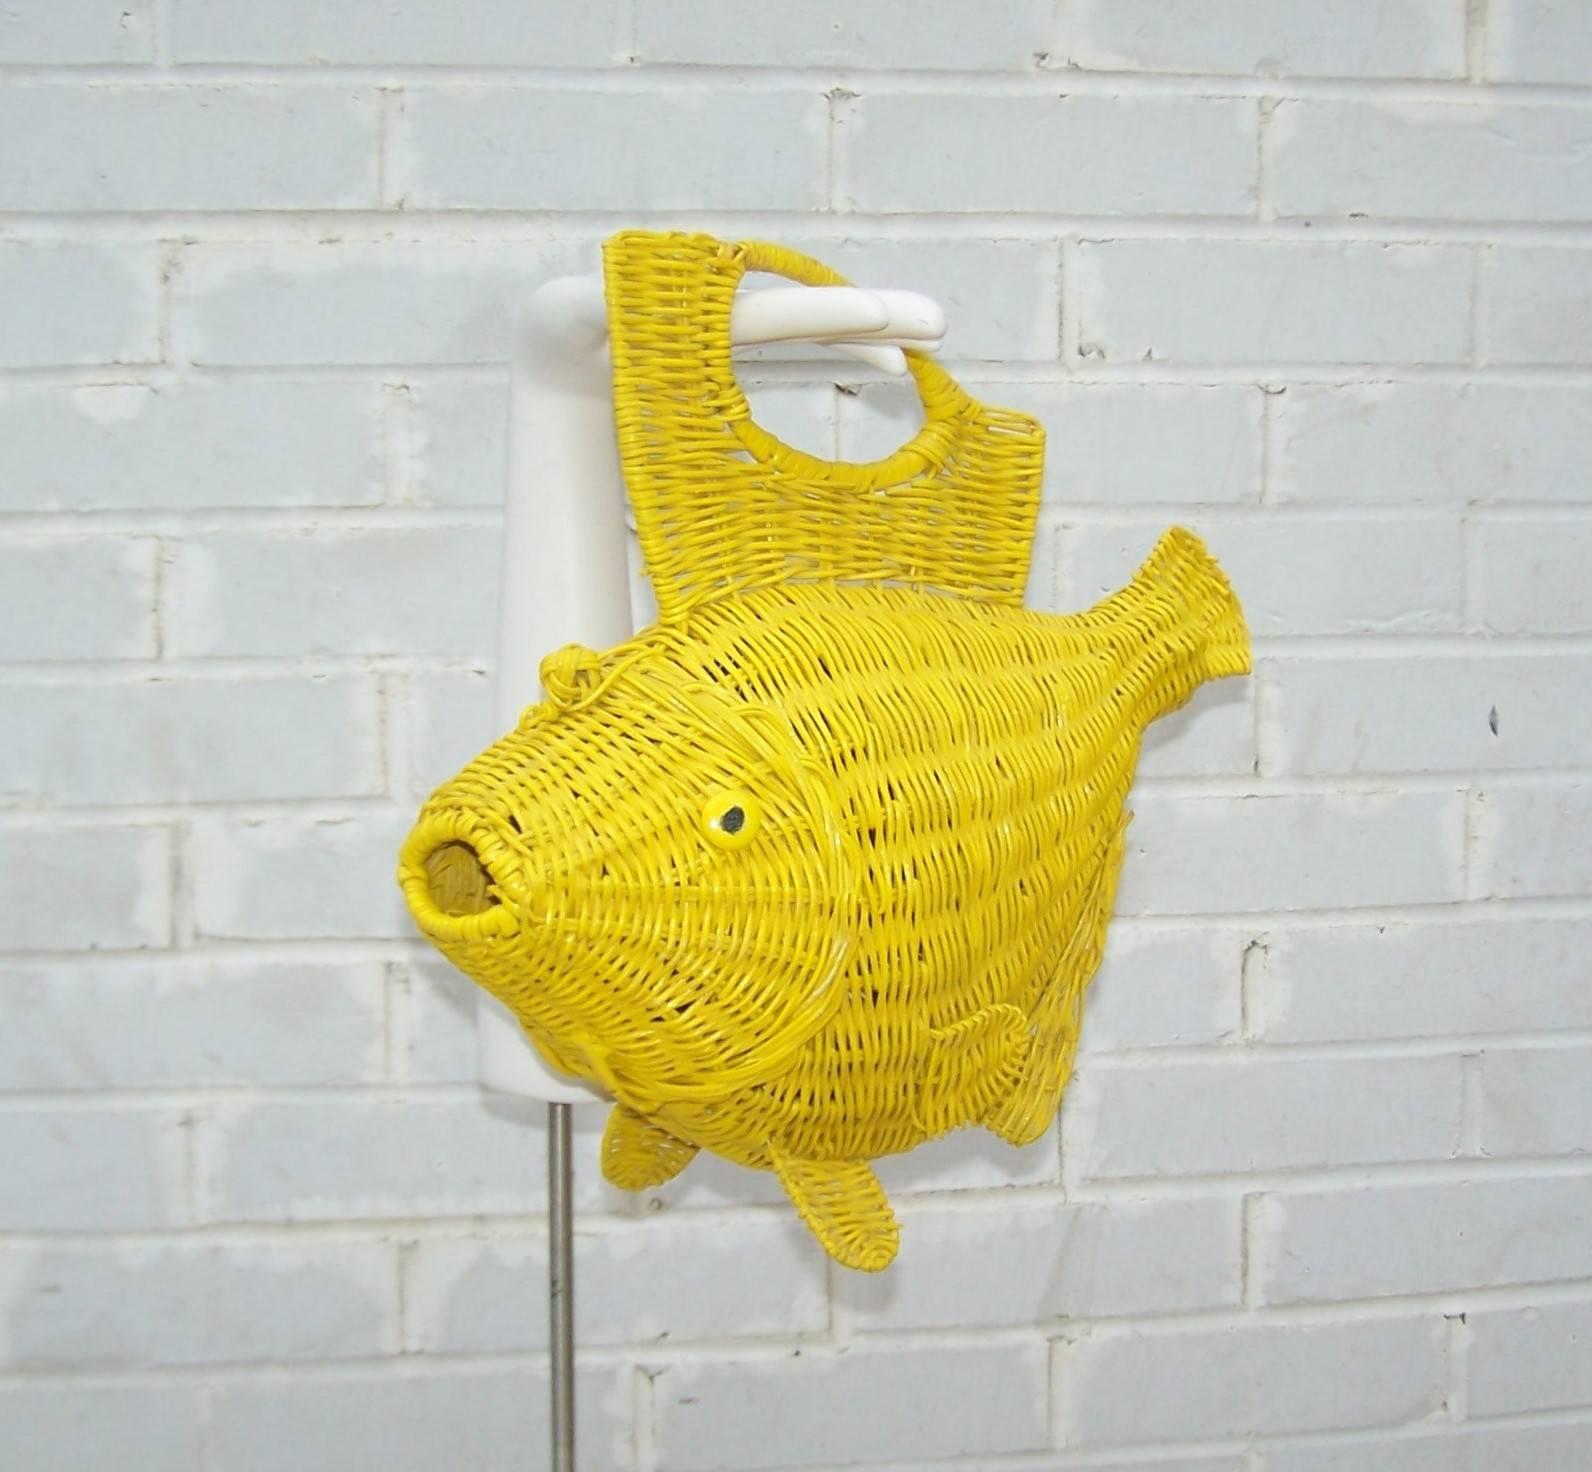 Personality plus!  This 1950's novelty handbag is a great conversation piece and functional to boot.  The canary yellow wicker fish frame opens at the head with an elasticized frog style closure and reveals a roomy interior suitable for modern